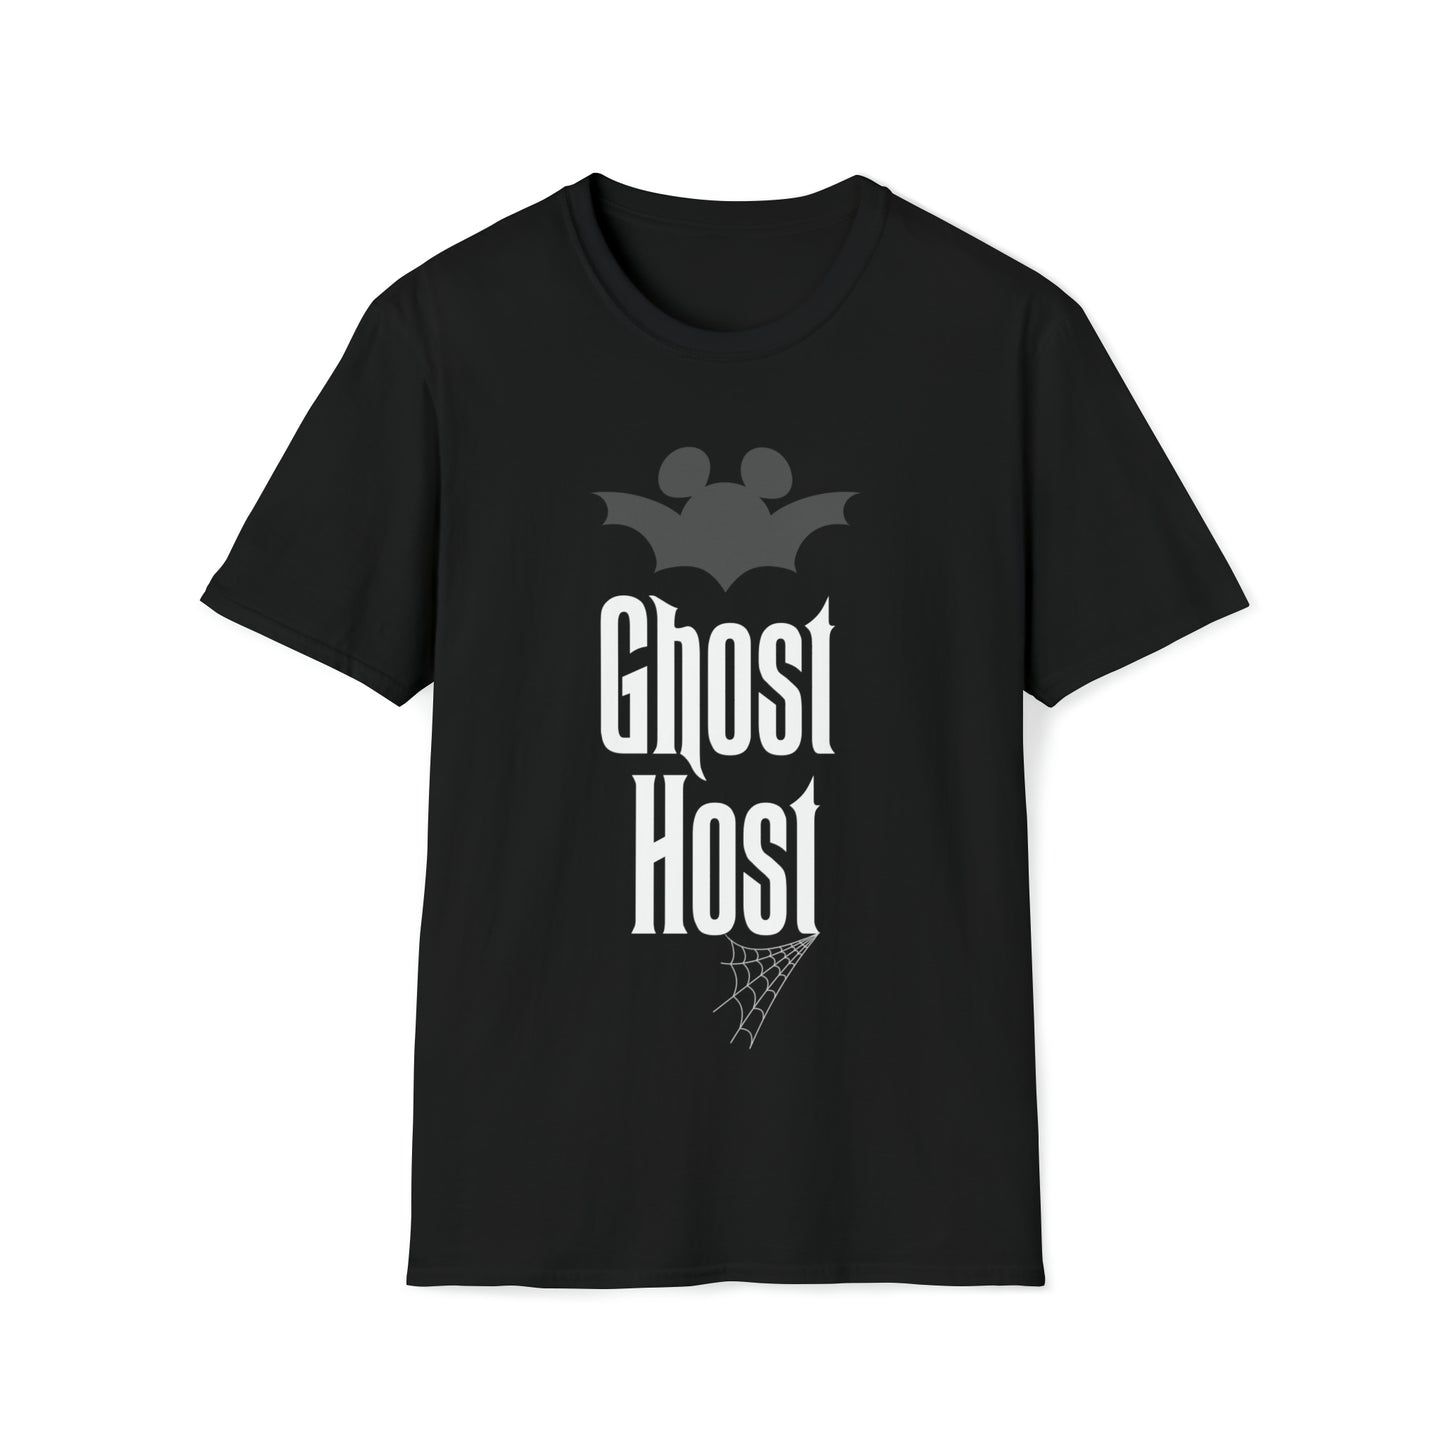 Ghost Host - Unisex Softstyle T-Shirt